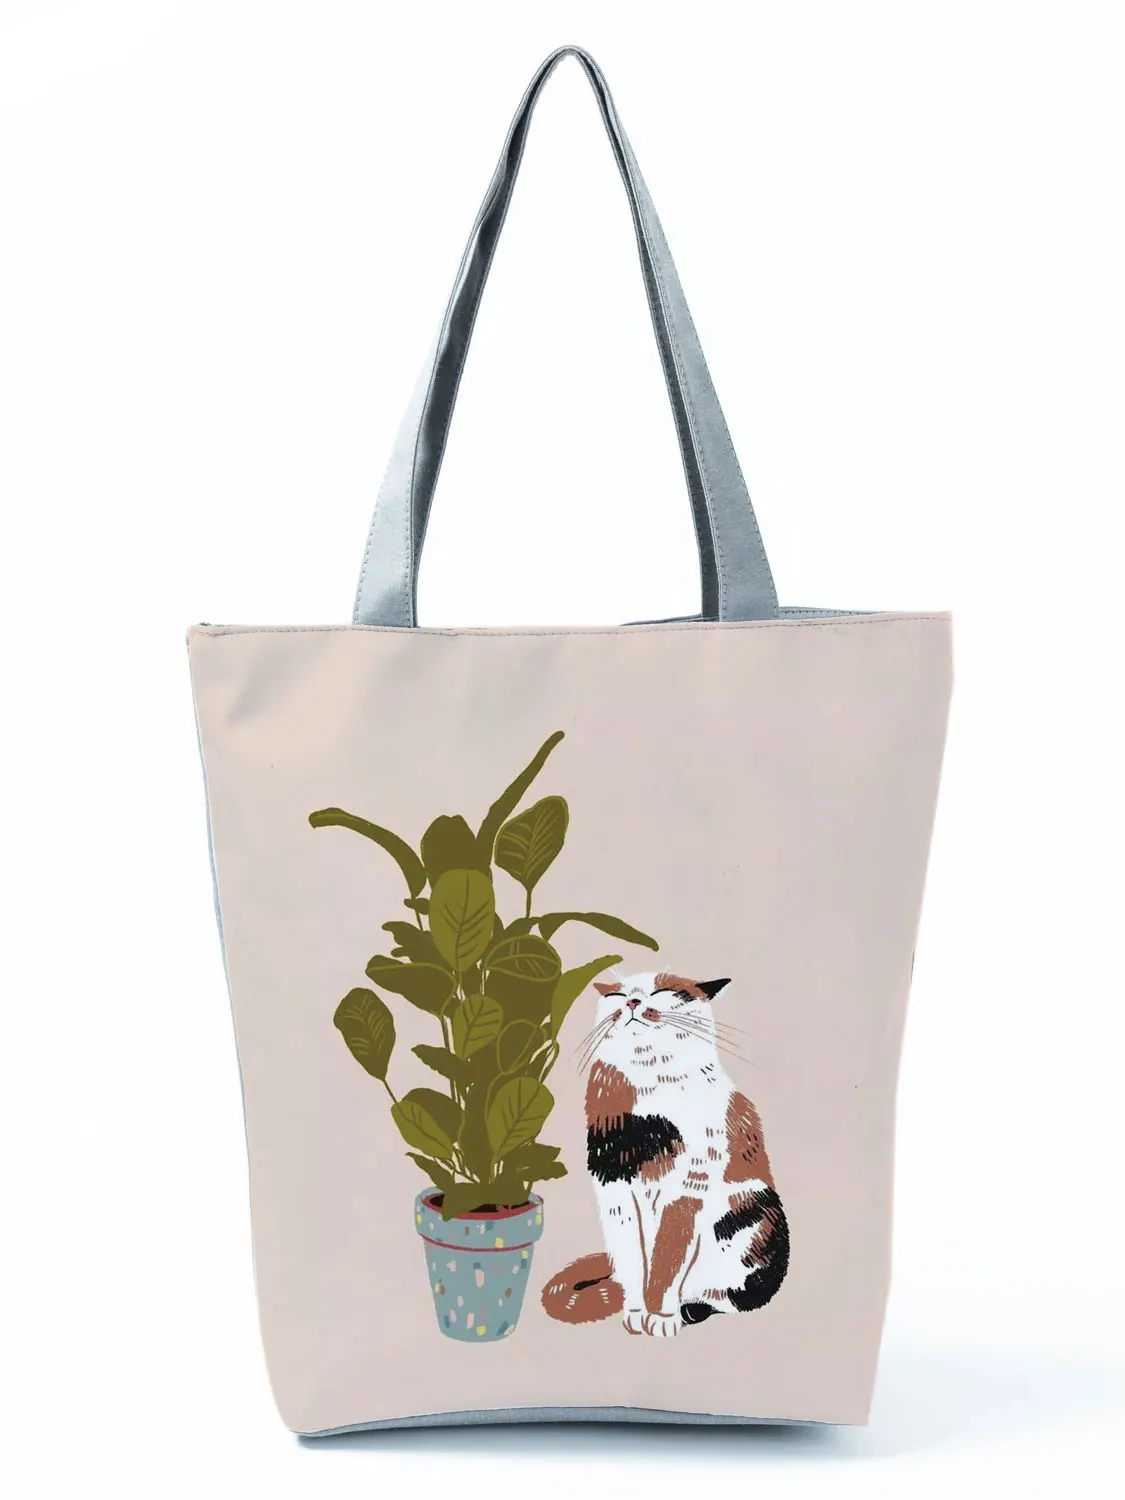 Customize Handbgas Cute Black I Love Cat Painting Women Designer Tote Animal Graphic Eco Reusable Shopping Shopper Bags Foldable women's bags brands	. Totes